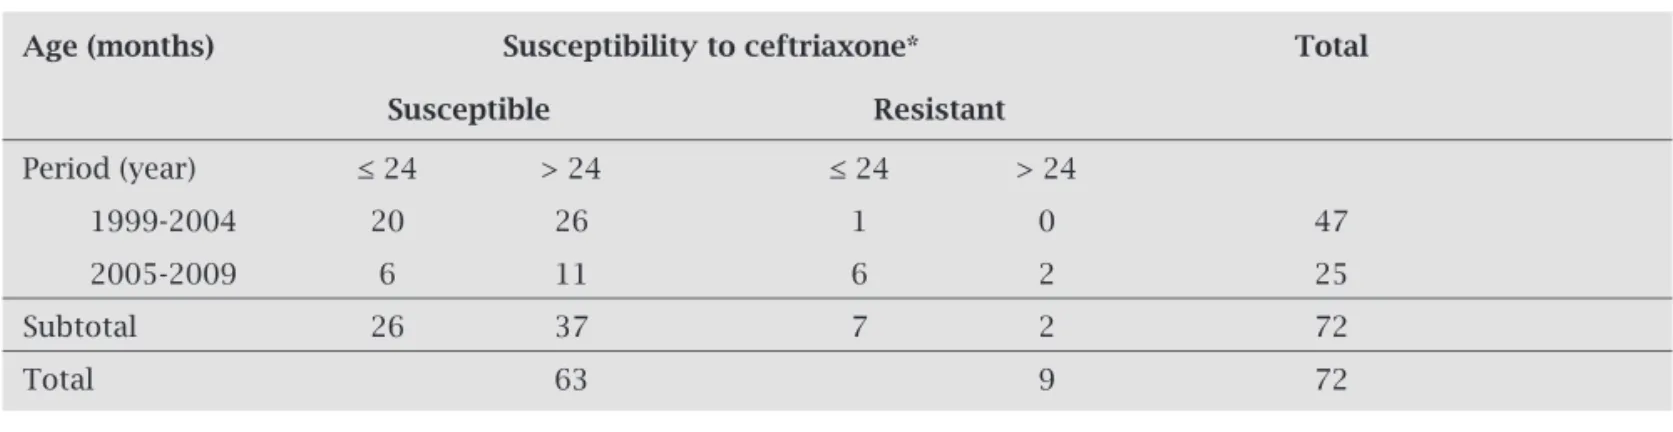 Table 3. Distribution of pneumococcal strains isolated from patients with meningitis according to susceptibility  to ceftriaxone, age bracket, and isolation period